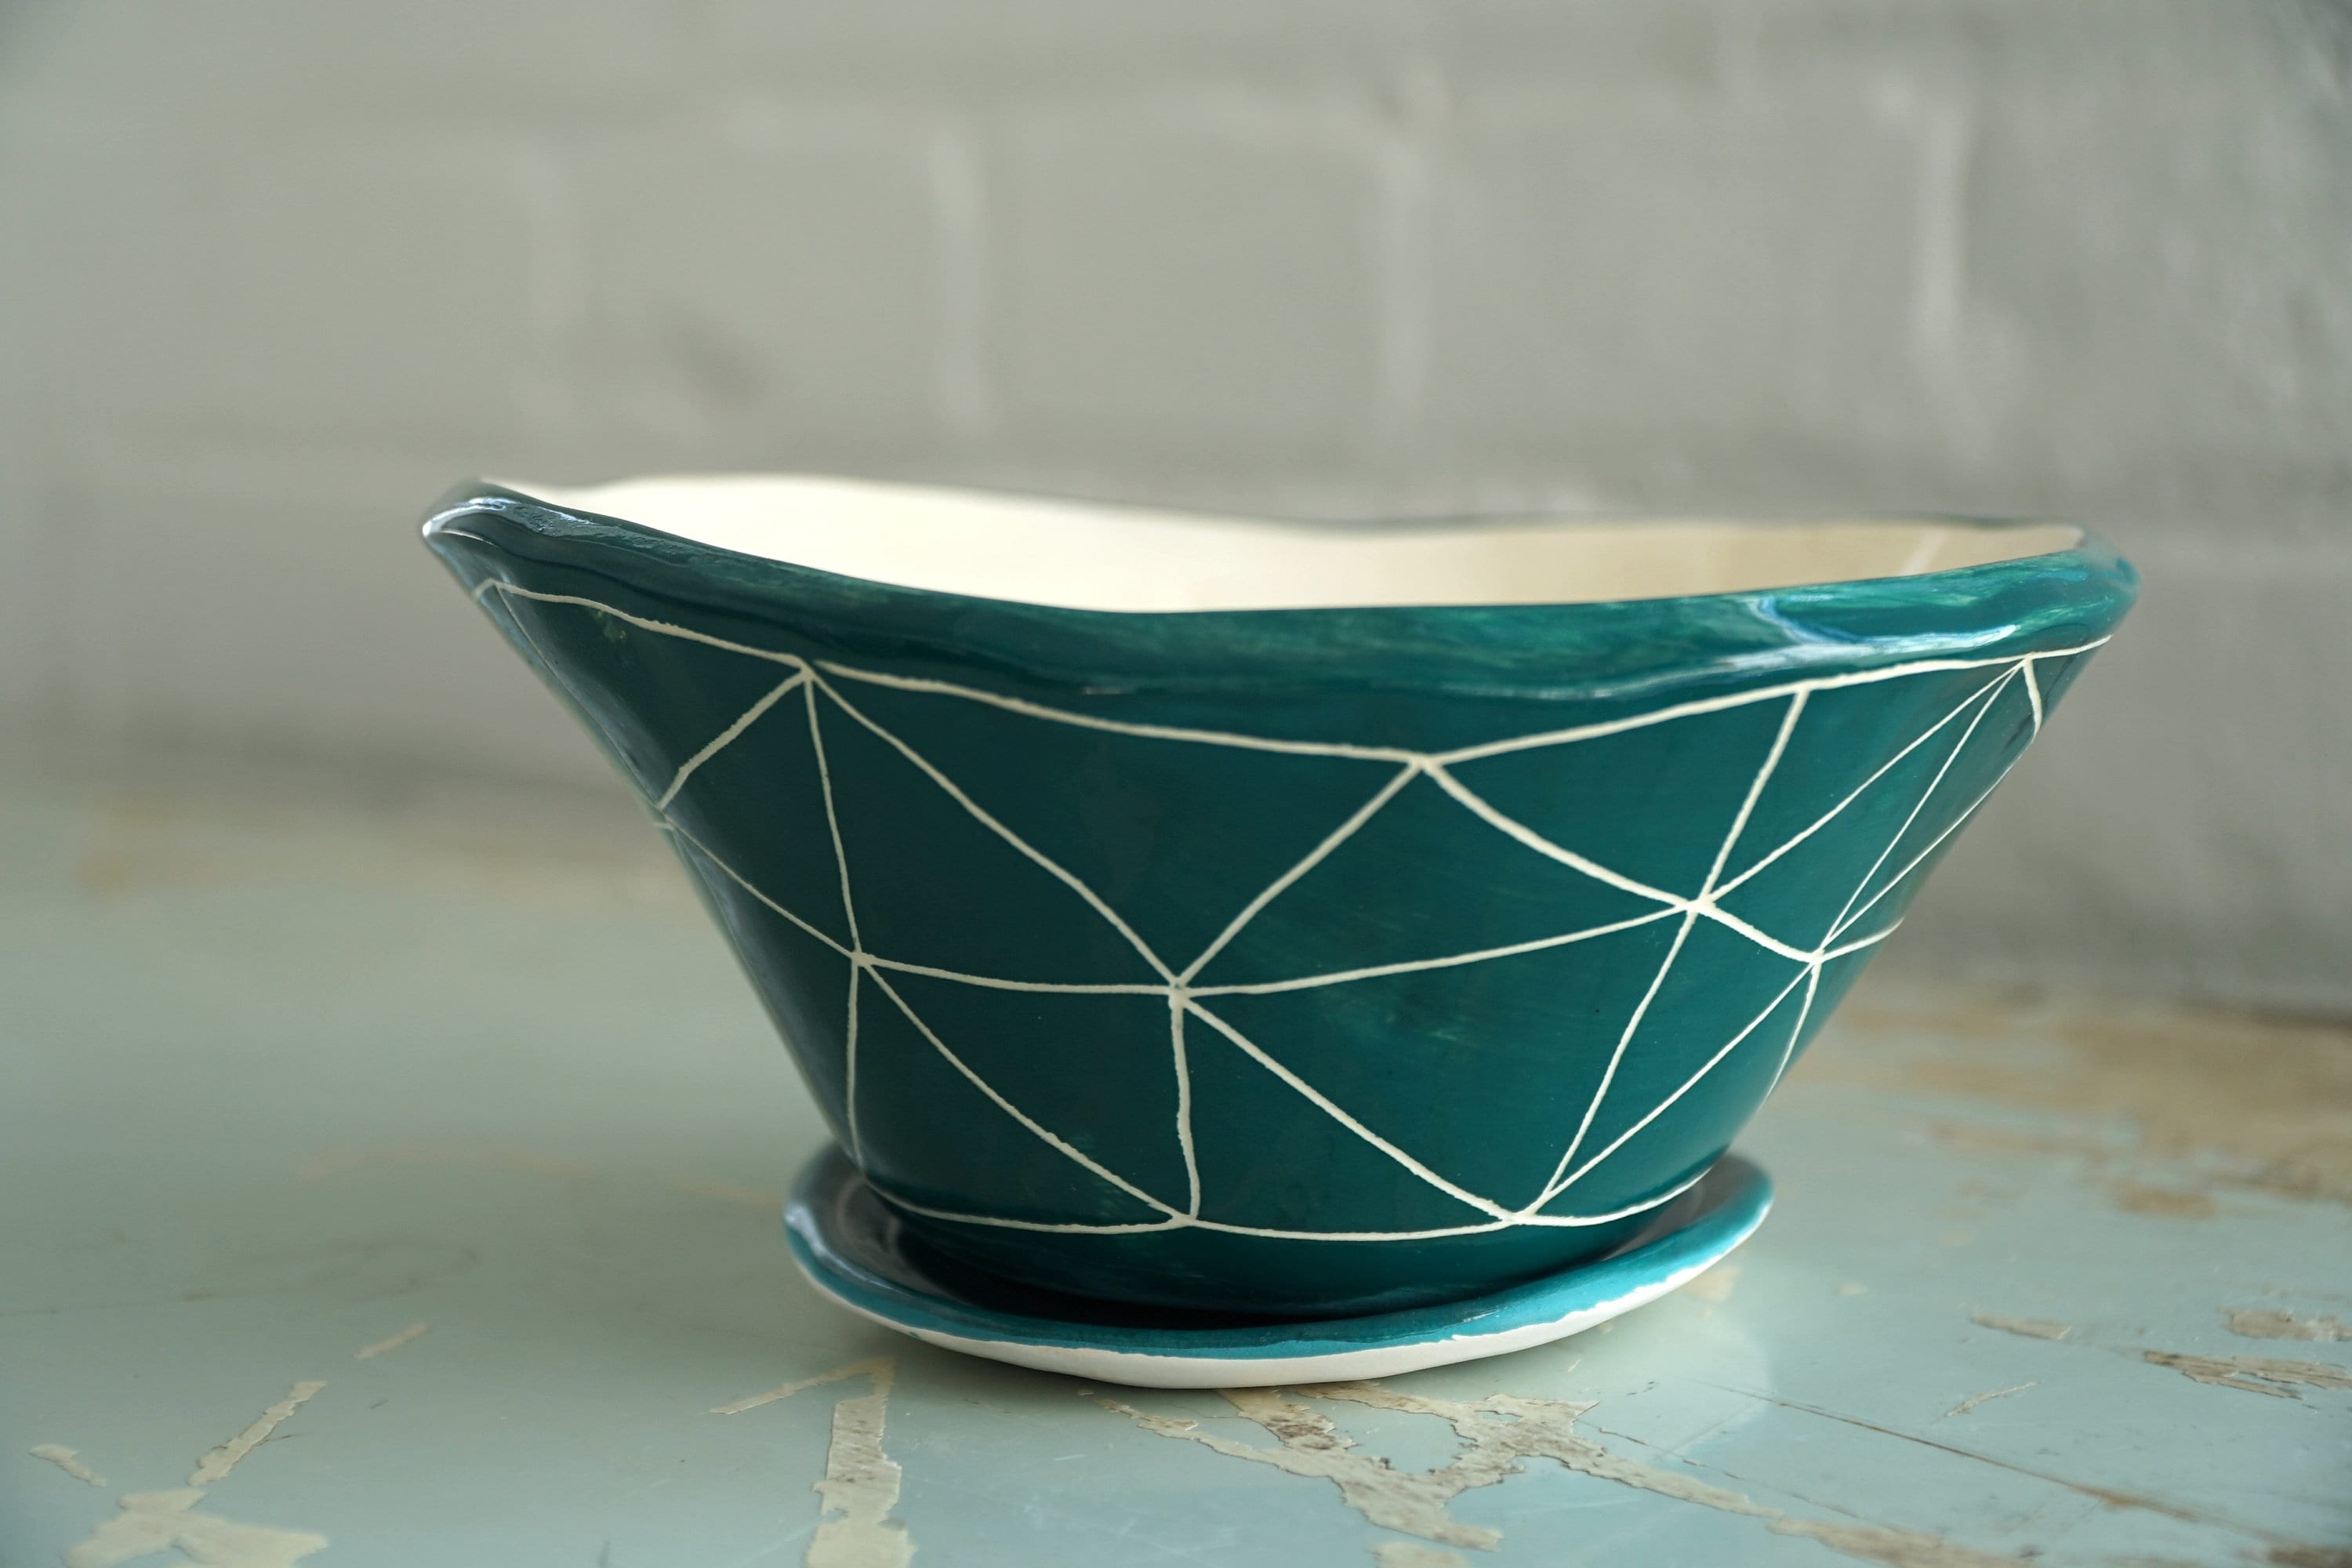 Teal & White Glazed Table Planter w/ “GeoTriangle" Design - Matching Tray - Succulent Planter - Indoor Planter - Etc